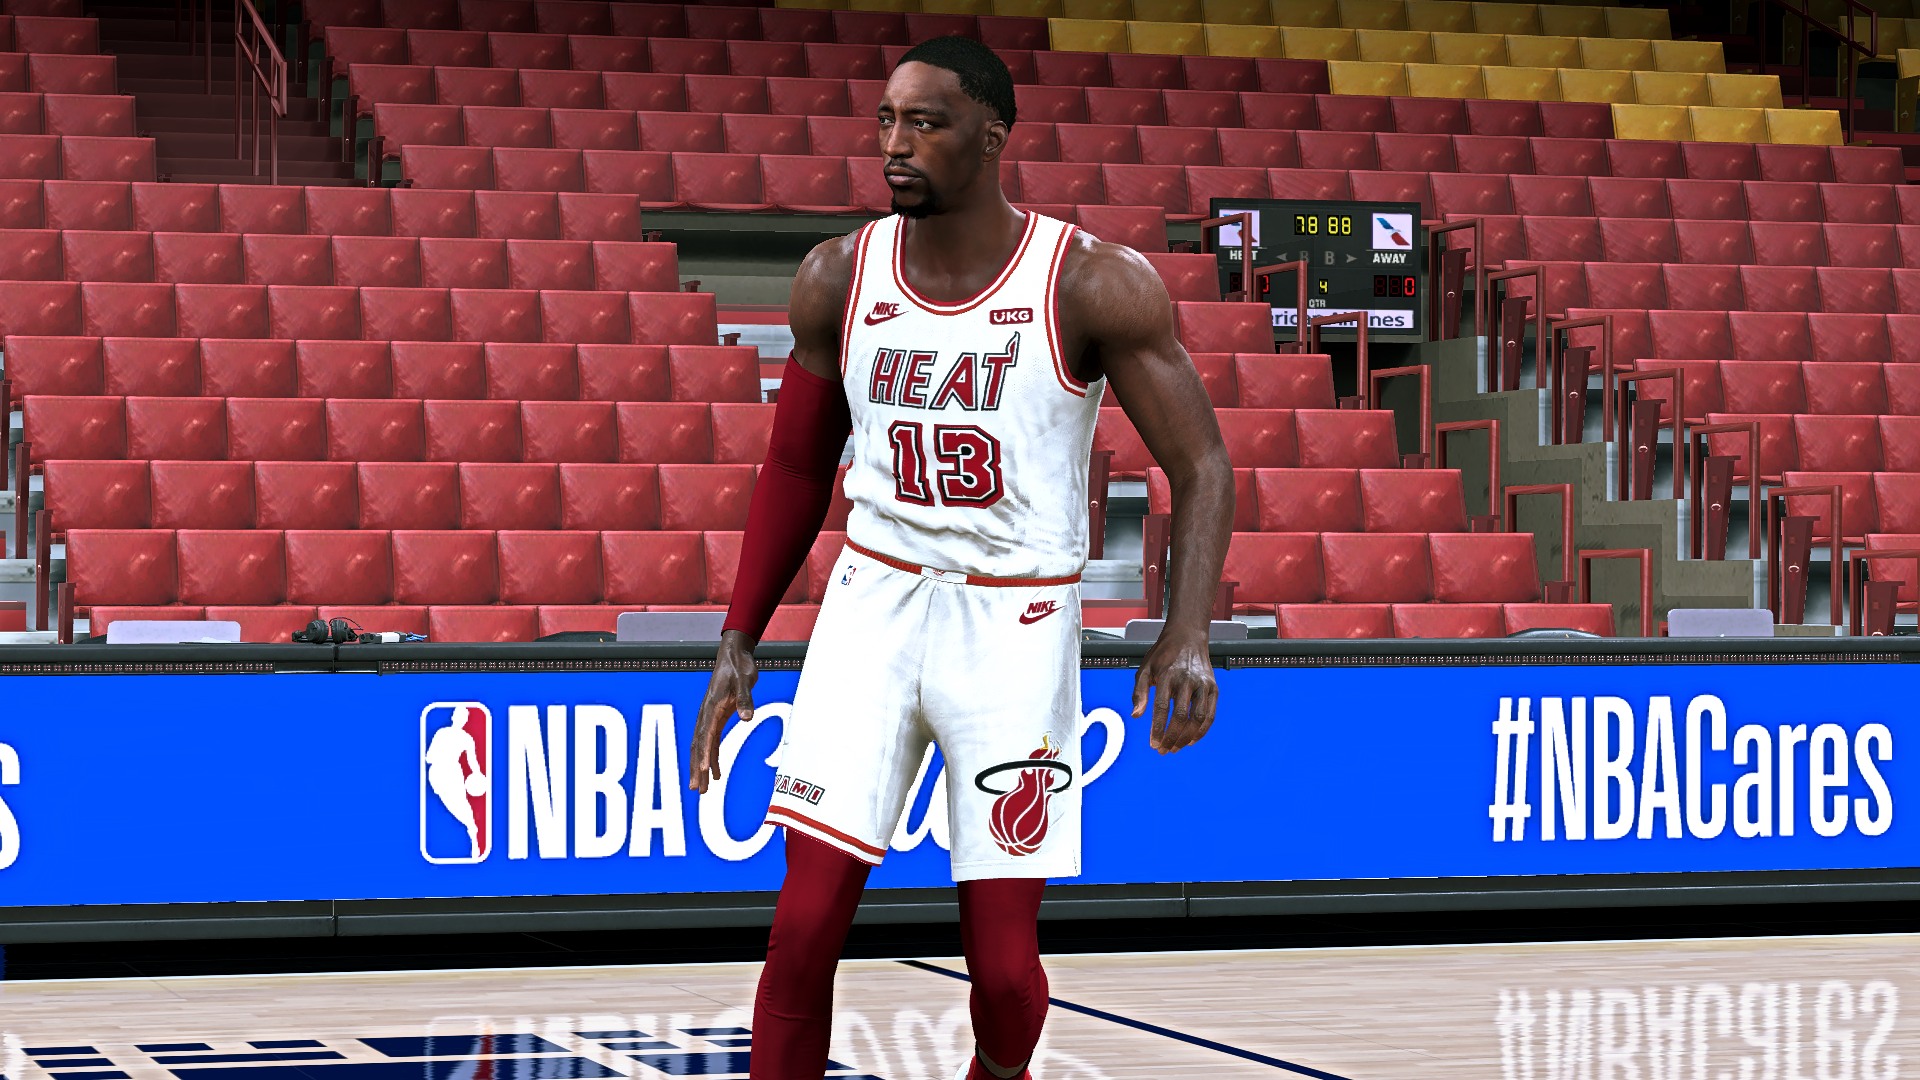 How To get Miami Heat mashup jersey,court,and logo in NBA 2k22 